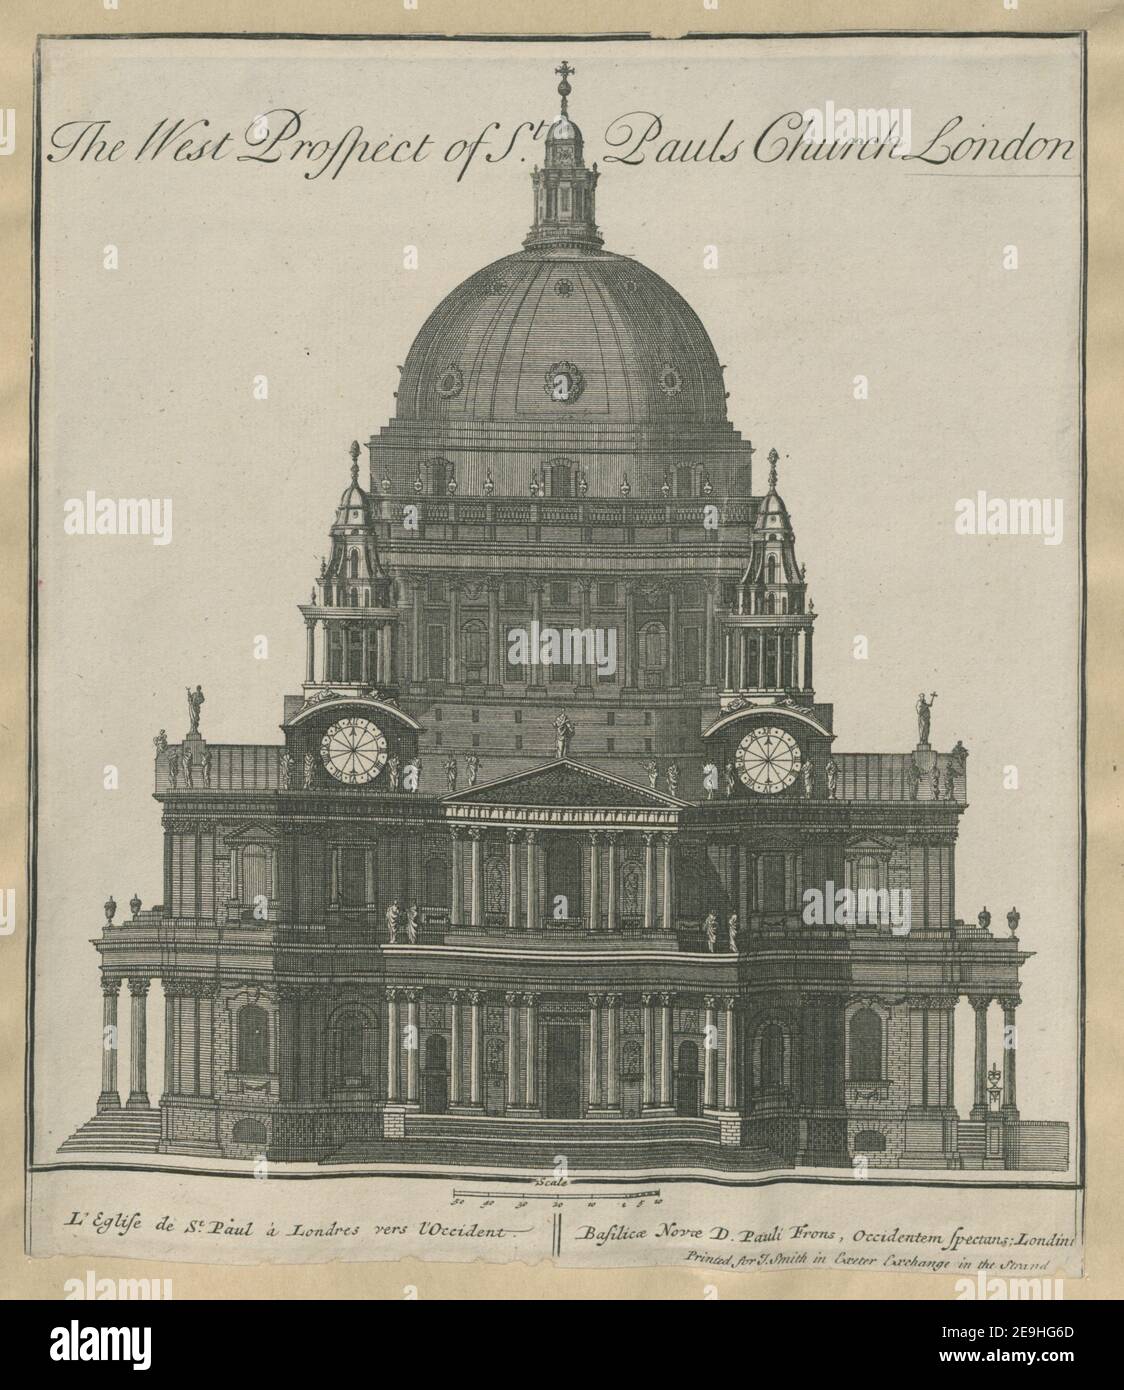 The West Prospect of St. Paul's Church London = L'Eglise de St. Paul aÃÄ Londres vers l'Occident = Basilic√¶ Nov√¶ D. Pauli Frons, Occidentem Spectans Londini. Visual Material information:  Title: The West Prospect of St. Paul's Church London = L'Eglise de St. Paul aÃÄ Londres vers l'Occident = Basilic√¶ Nov√¶ D. Pauli Frons, Occidentem Spectans; Londini. 23.35.l. Place of publication: [London] Publisher: Printed for J. Smith in Exeter Exchange in the Strand, Date of publication: [1720]  Item type: 1 print Medium: etching and engraving Dimensions: sheet 25.2 x 2 Stock Photo